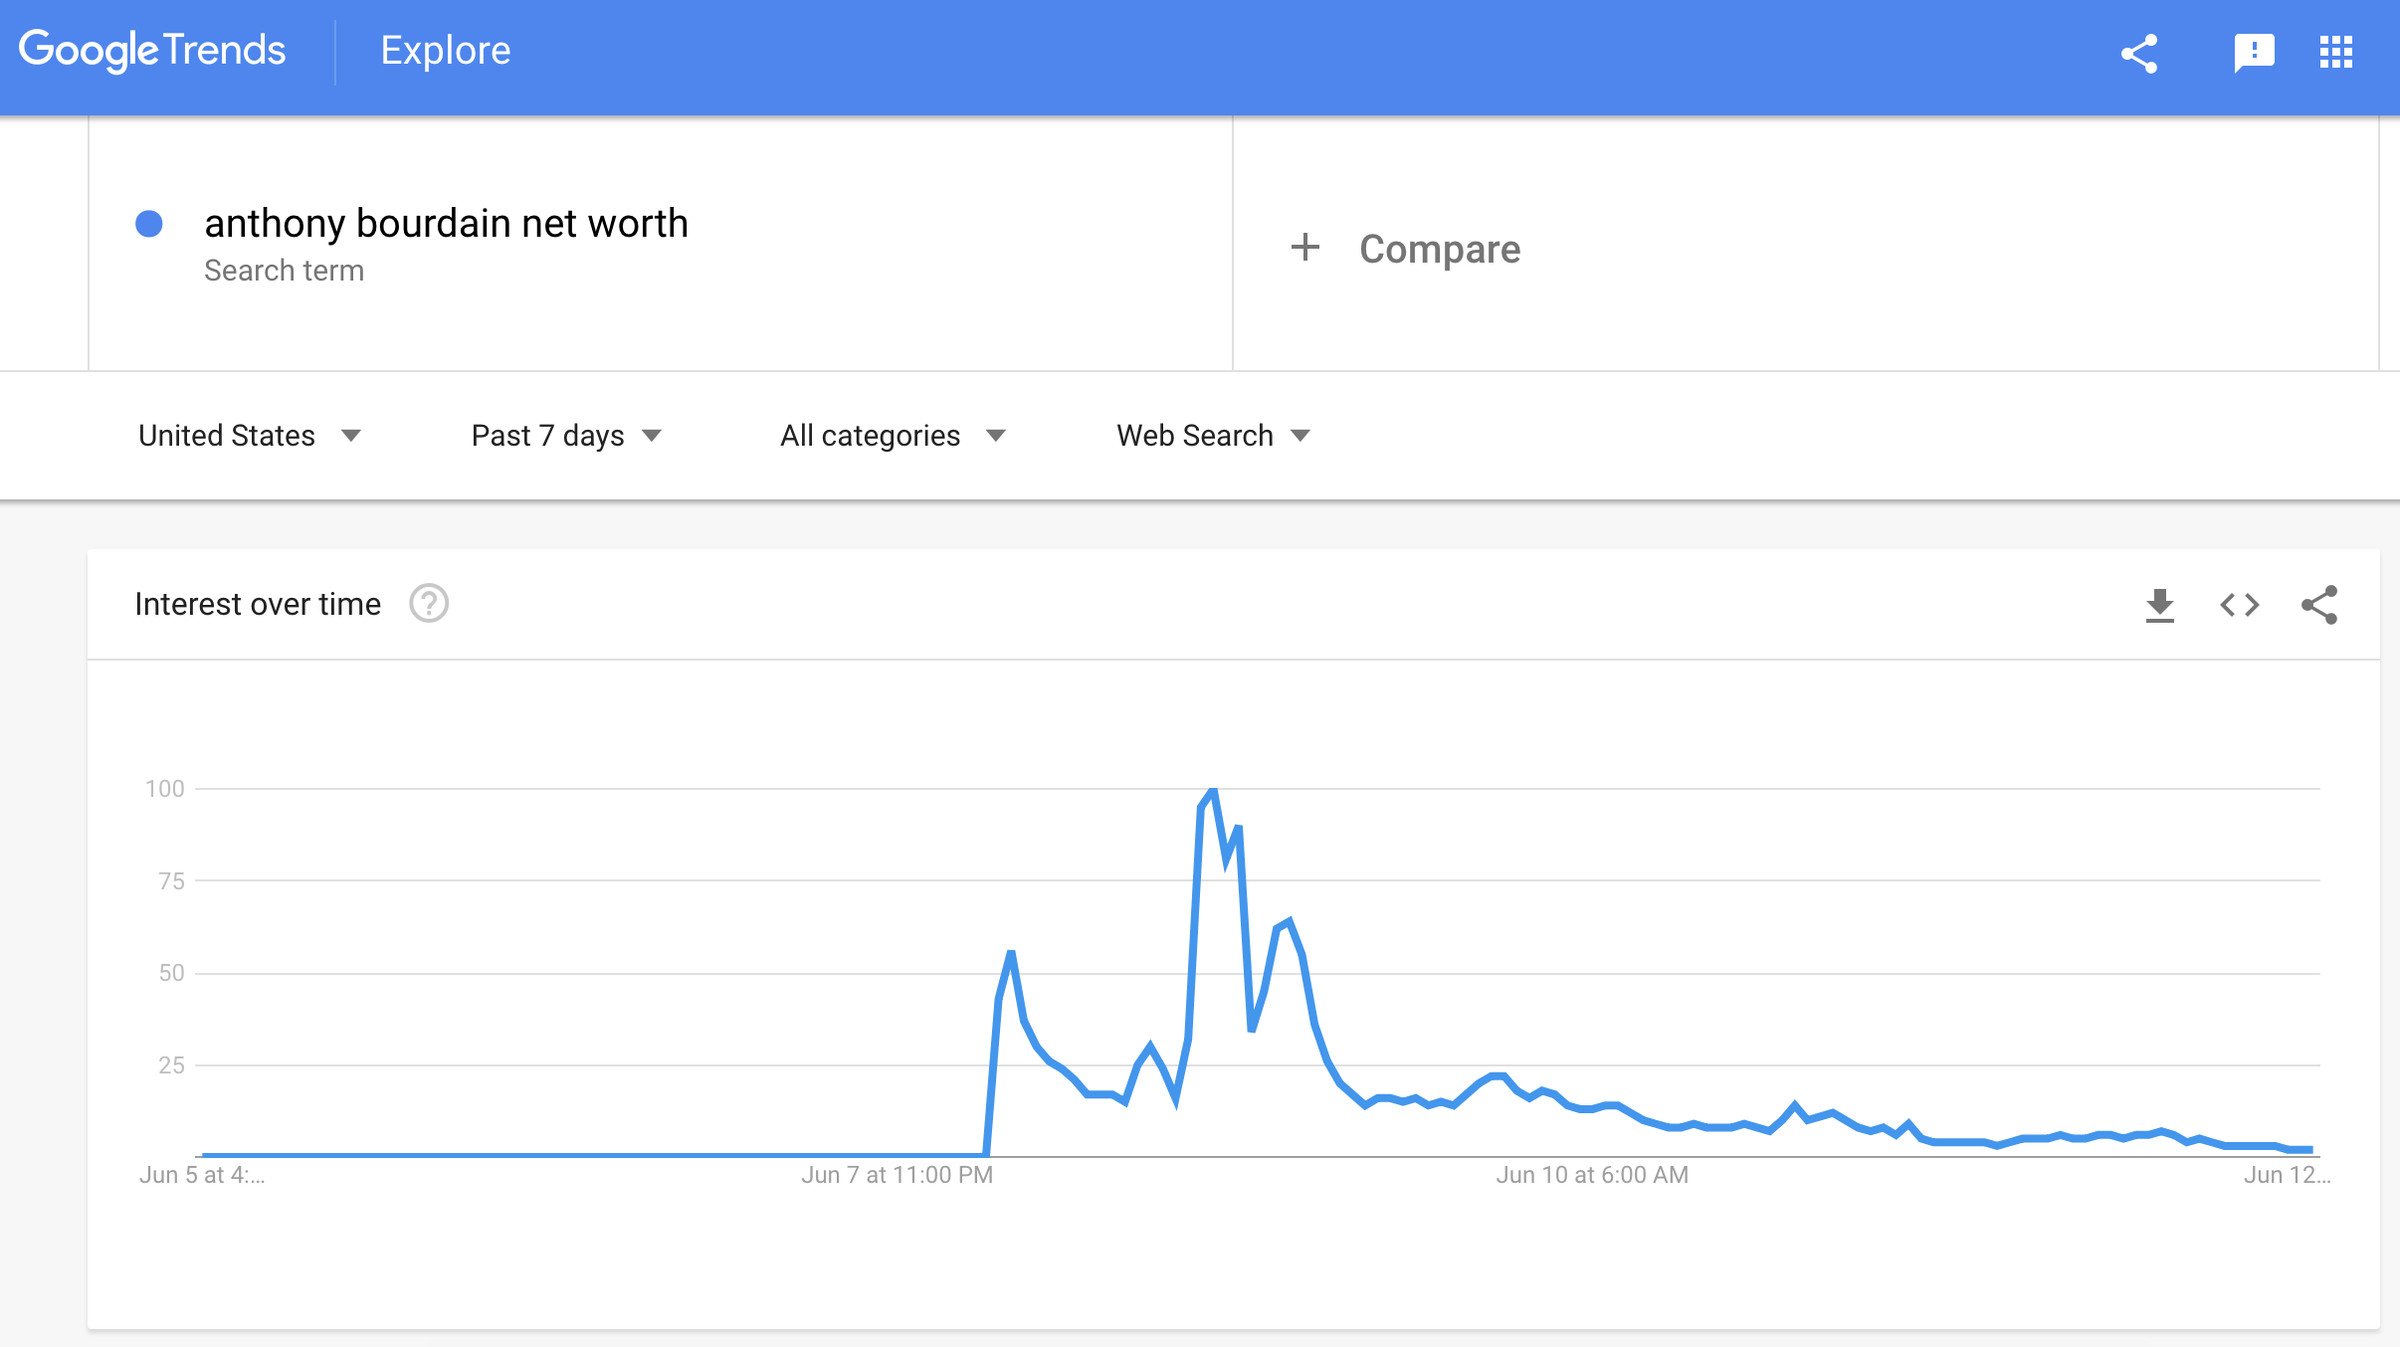 Google Trends data showing a spike in searches for “anthony bourdain net worth” after his death